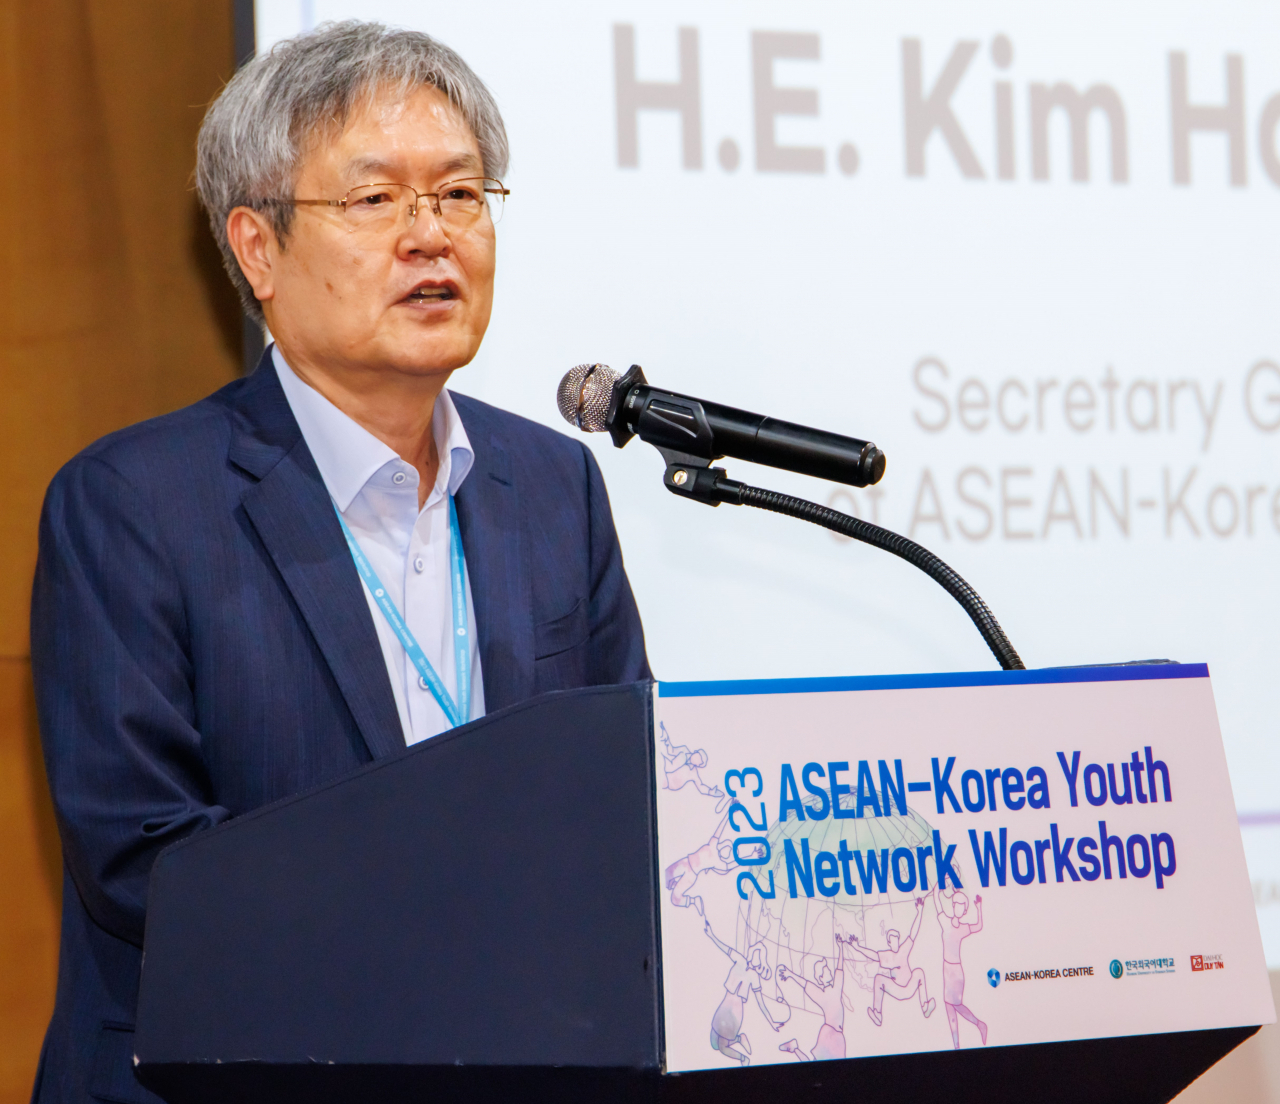 Secretary General Kim Hae-yong of the ASEAN-Korea Center delivers his opening remarks during the 2023 ASEAN-Korea Youth Network Workshop. ASEAN-Korea Center